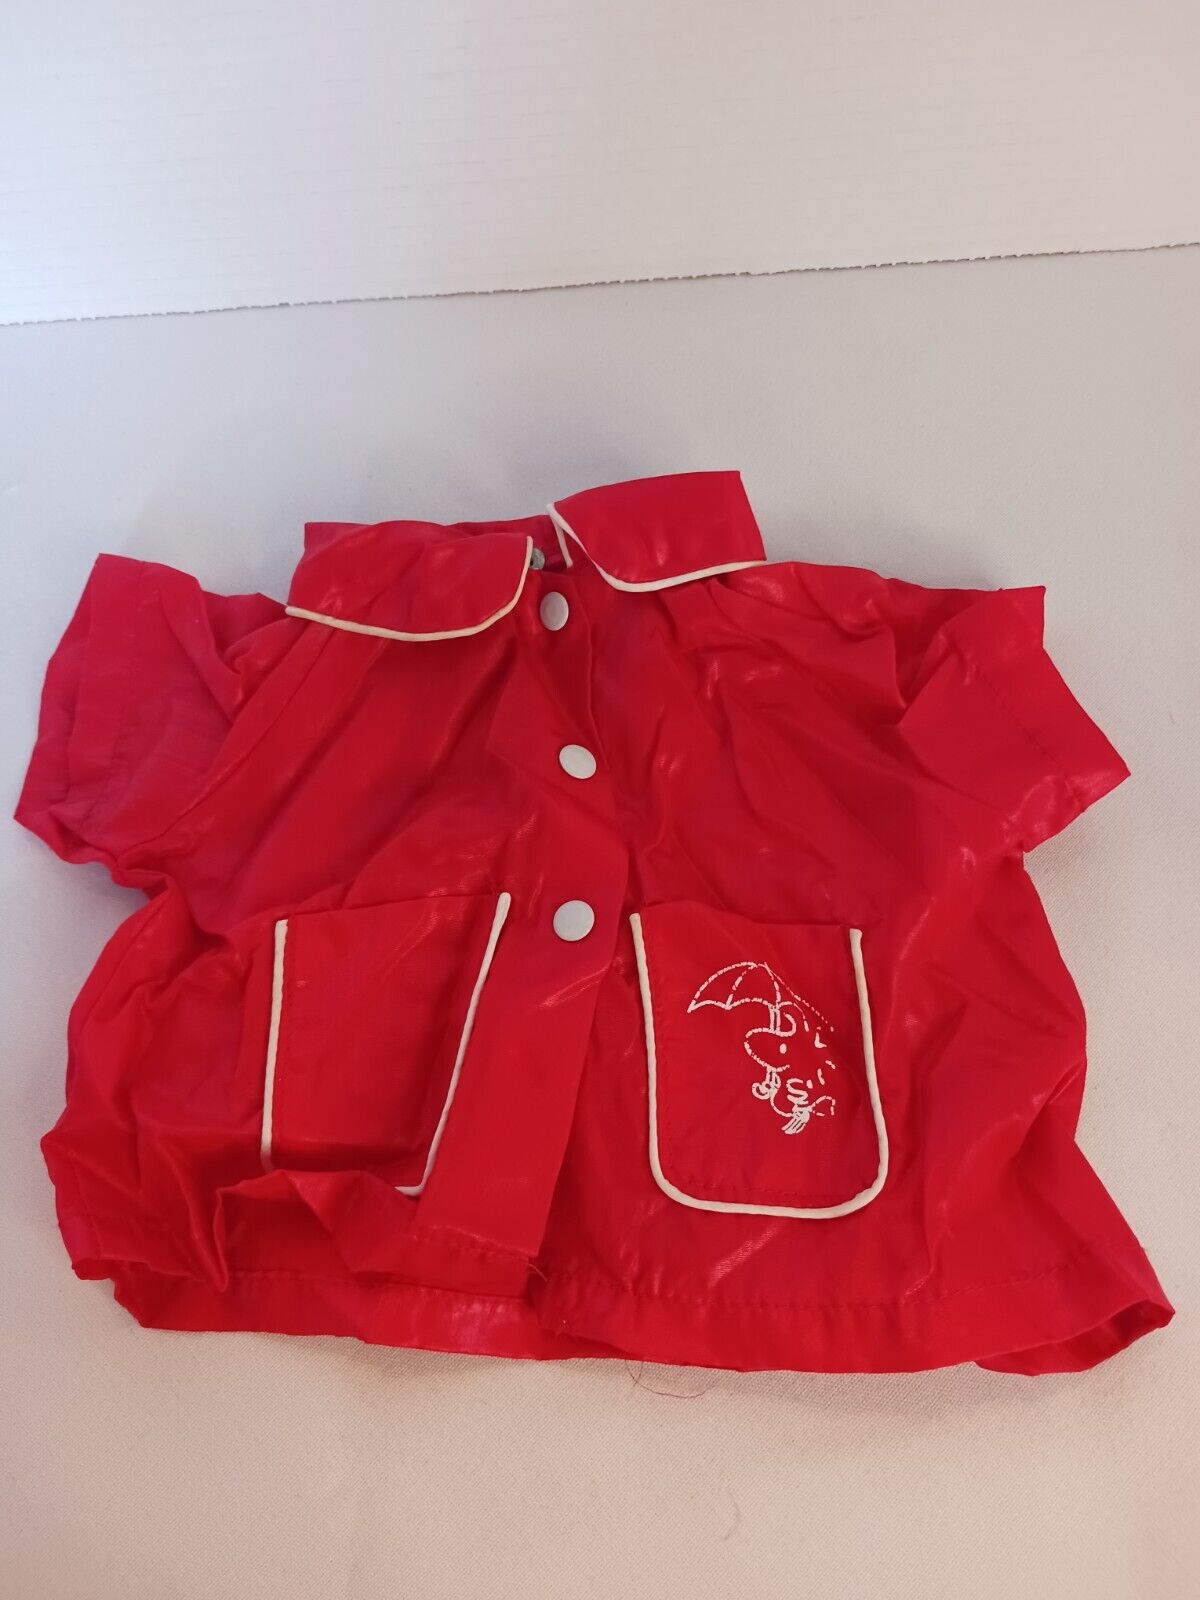 Vintage 1970s Peanuts Belle Red Raincoat without Removable Hood 